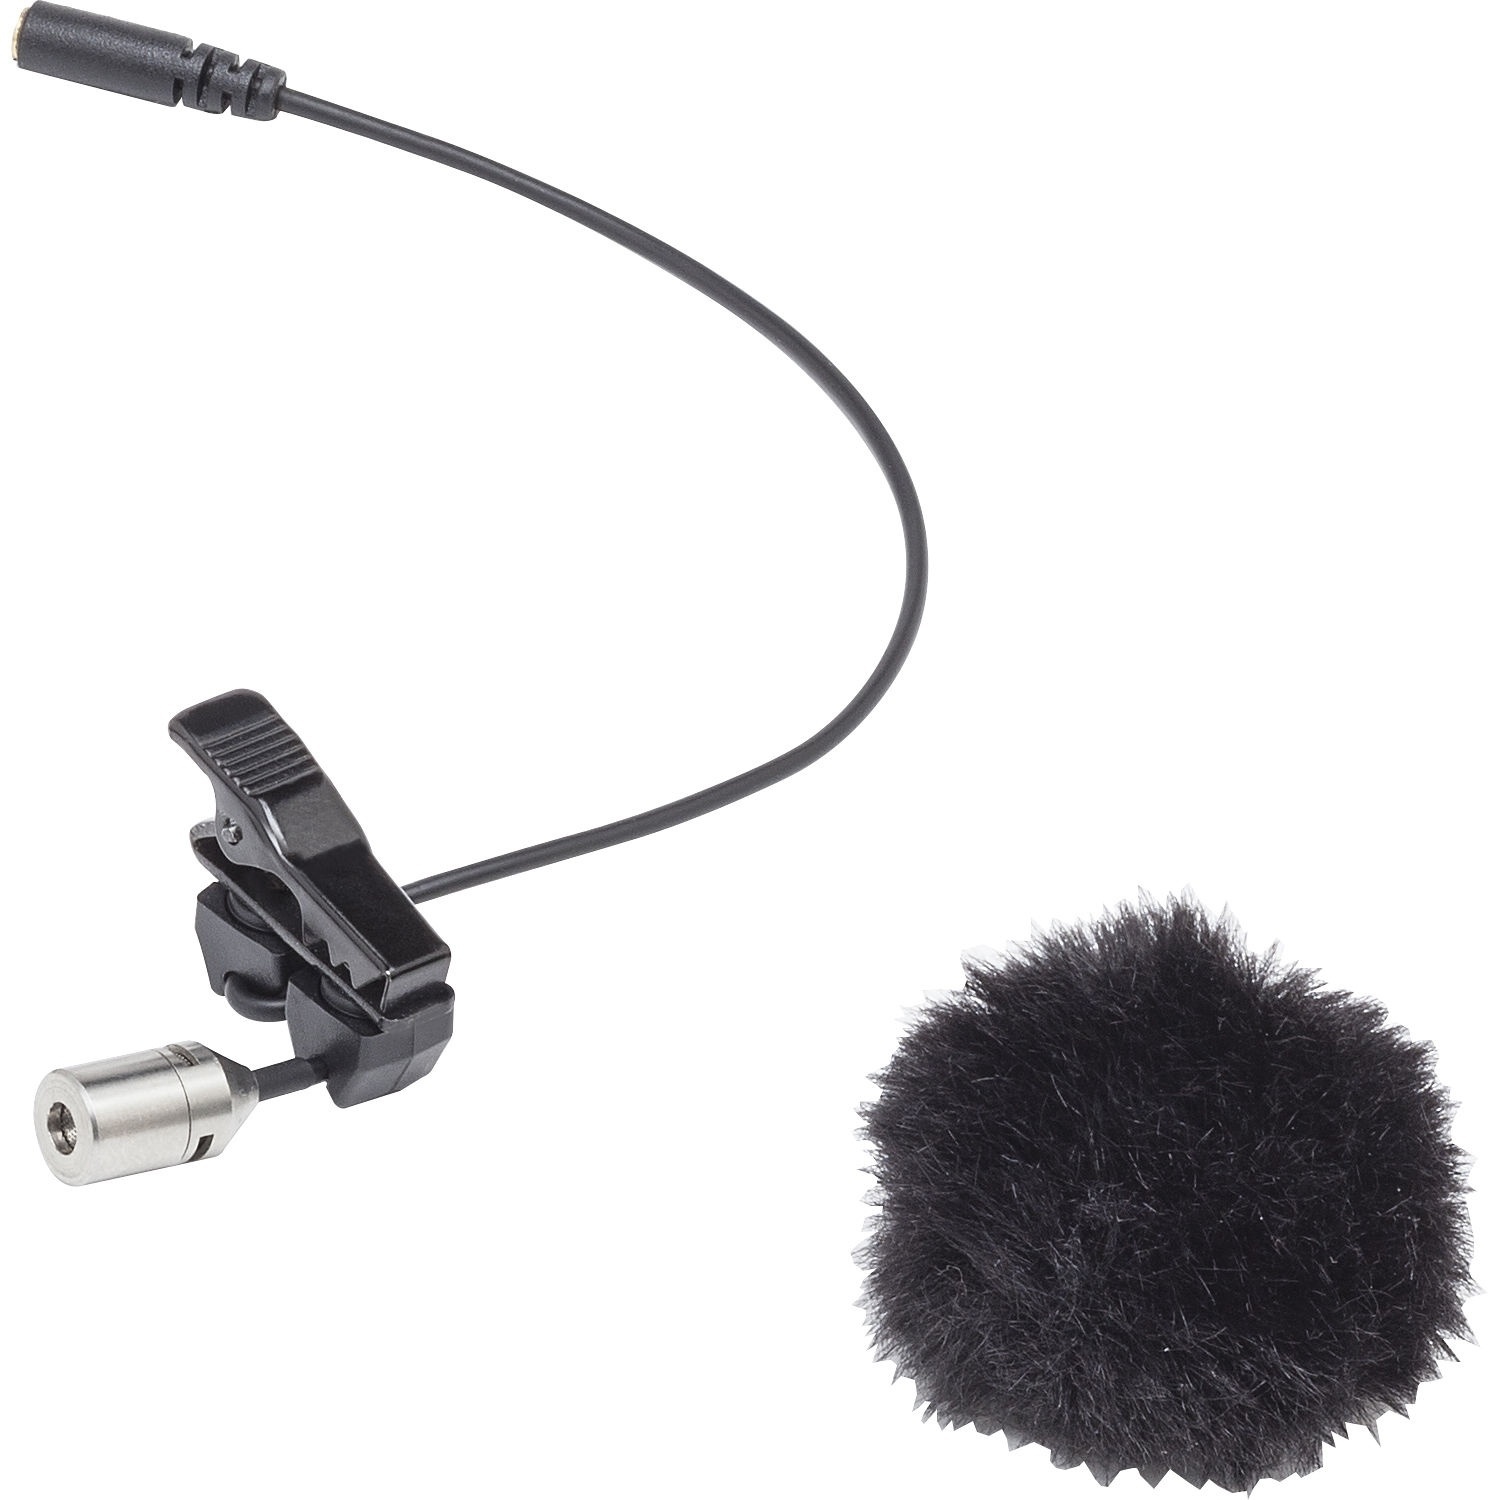 Samson LM7x Unidirectional Lavalier Microphone for Wireless Transmitters - Open Box Special